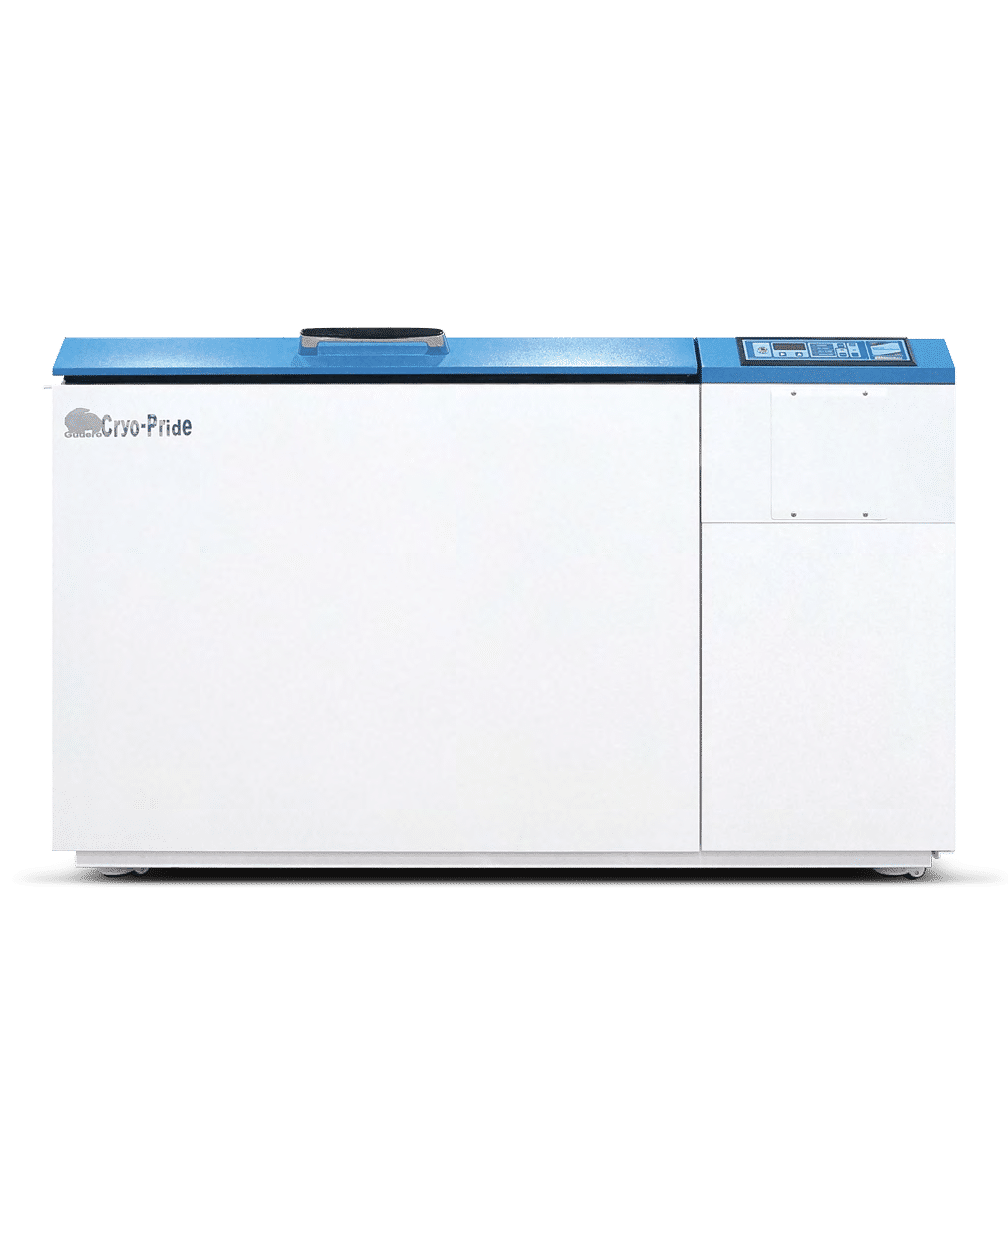 Buy ilShin Biobase Deep Freezer DF 4510 at best price in India with Free Shipping, Installation & Service